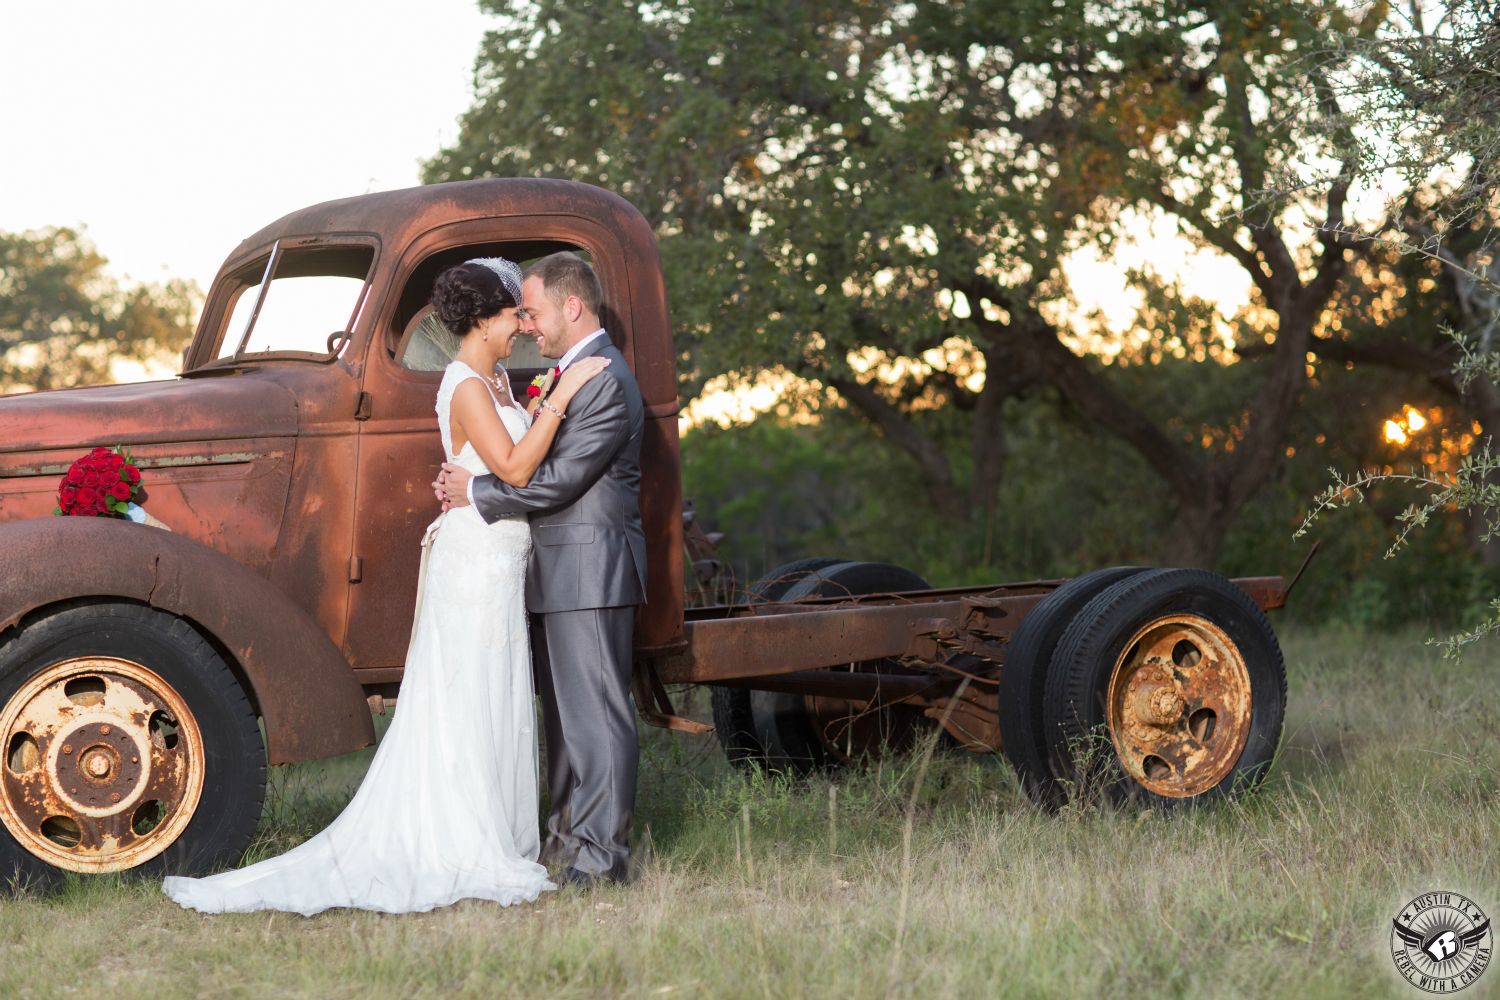 Austin wedding photgrapher takes picture of bride in white wedding gown with red rose bridal bouquet and groom in shiny grey suit embracing on their wedding day in front of rusted old truck at Star Hill Ranch Austin area wedding venue in the Hill Country.